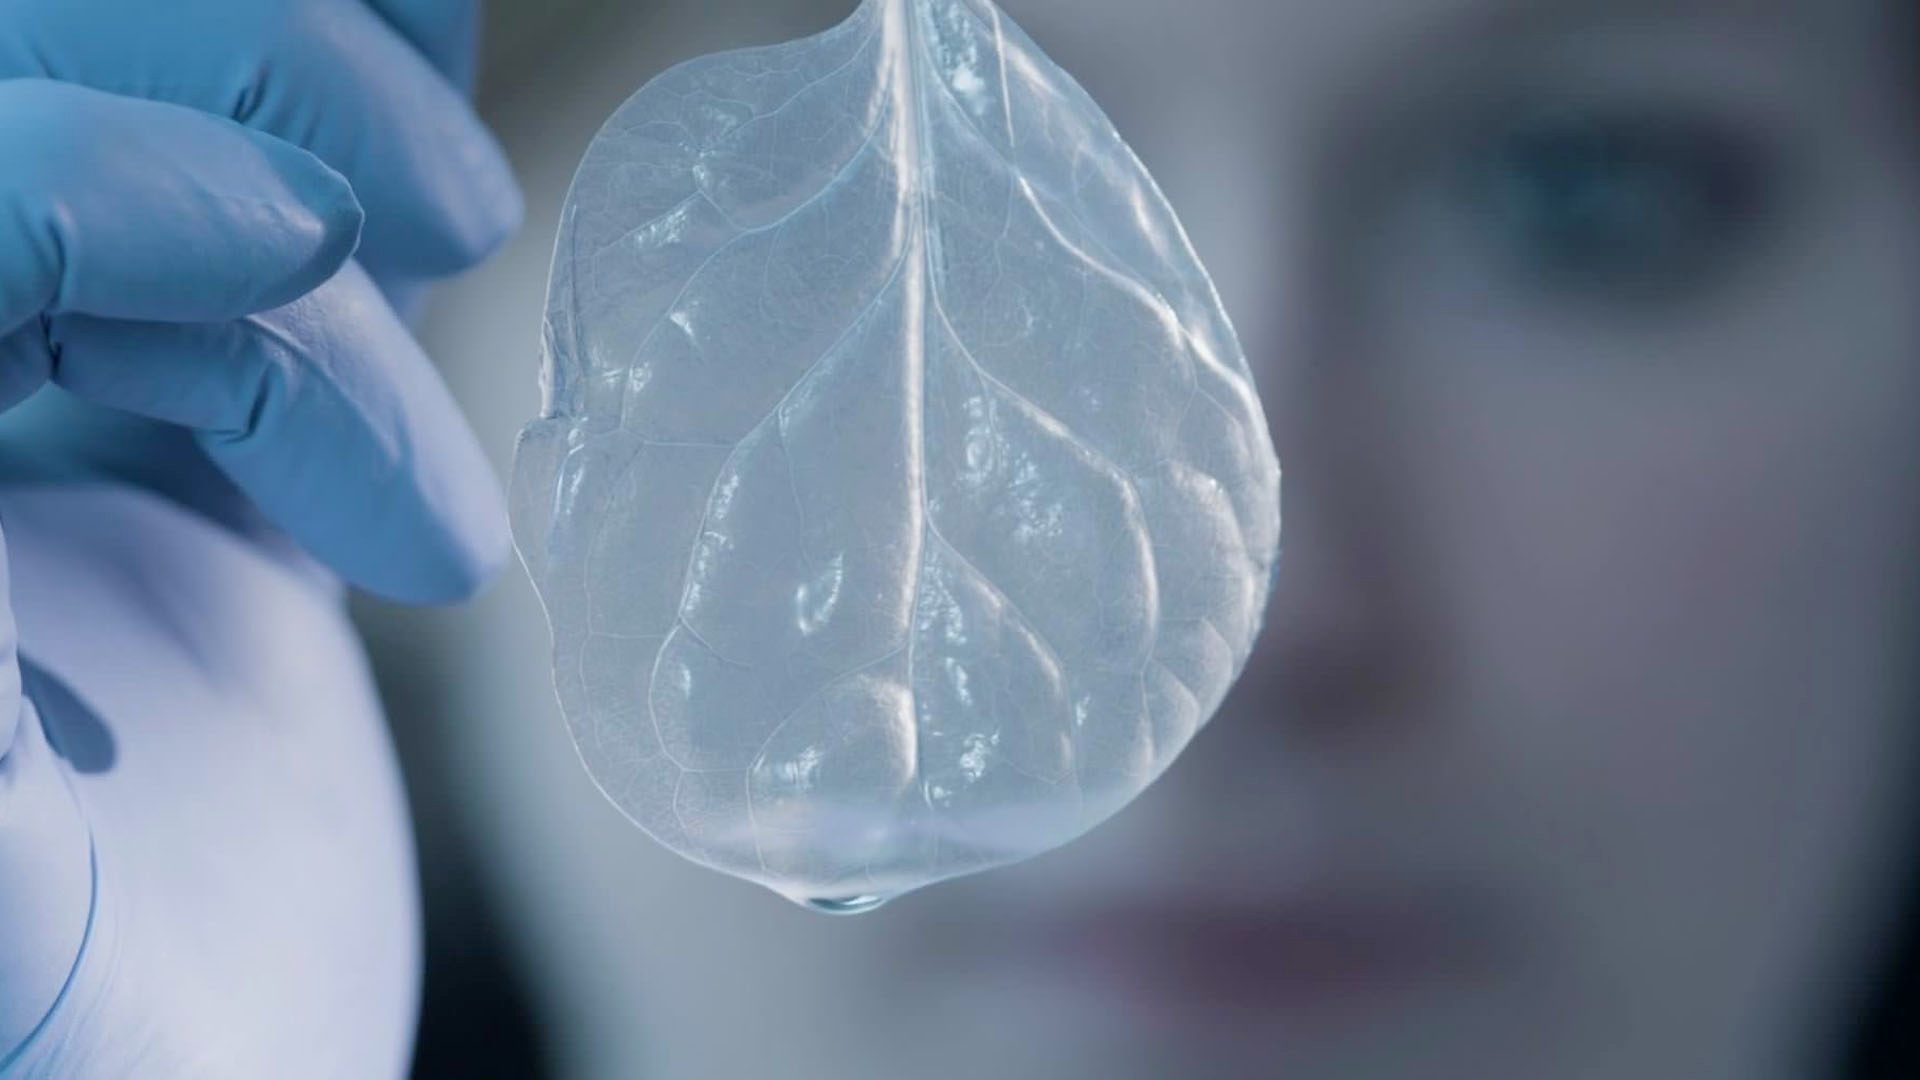 This image shows a female model holding a leaf as part of Pharmacology film for university of utrecht 